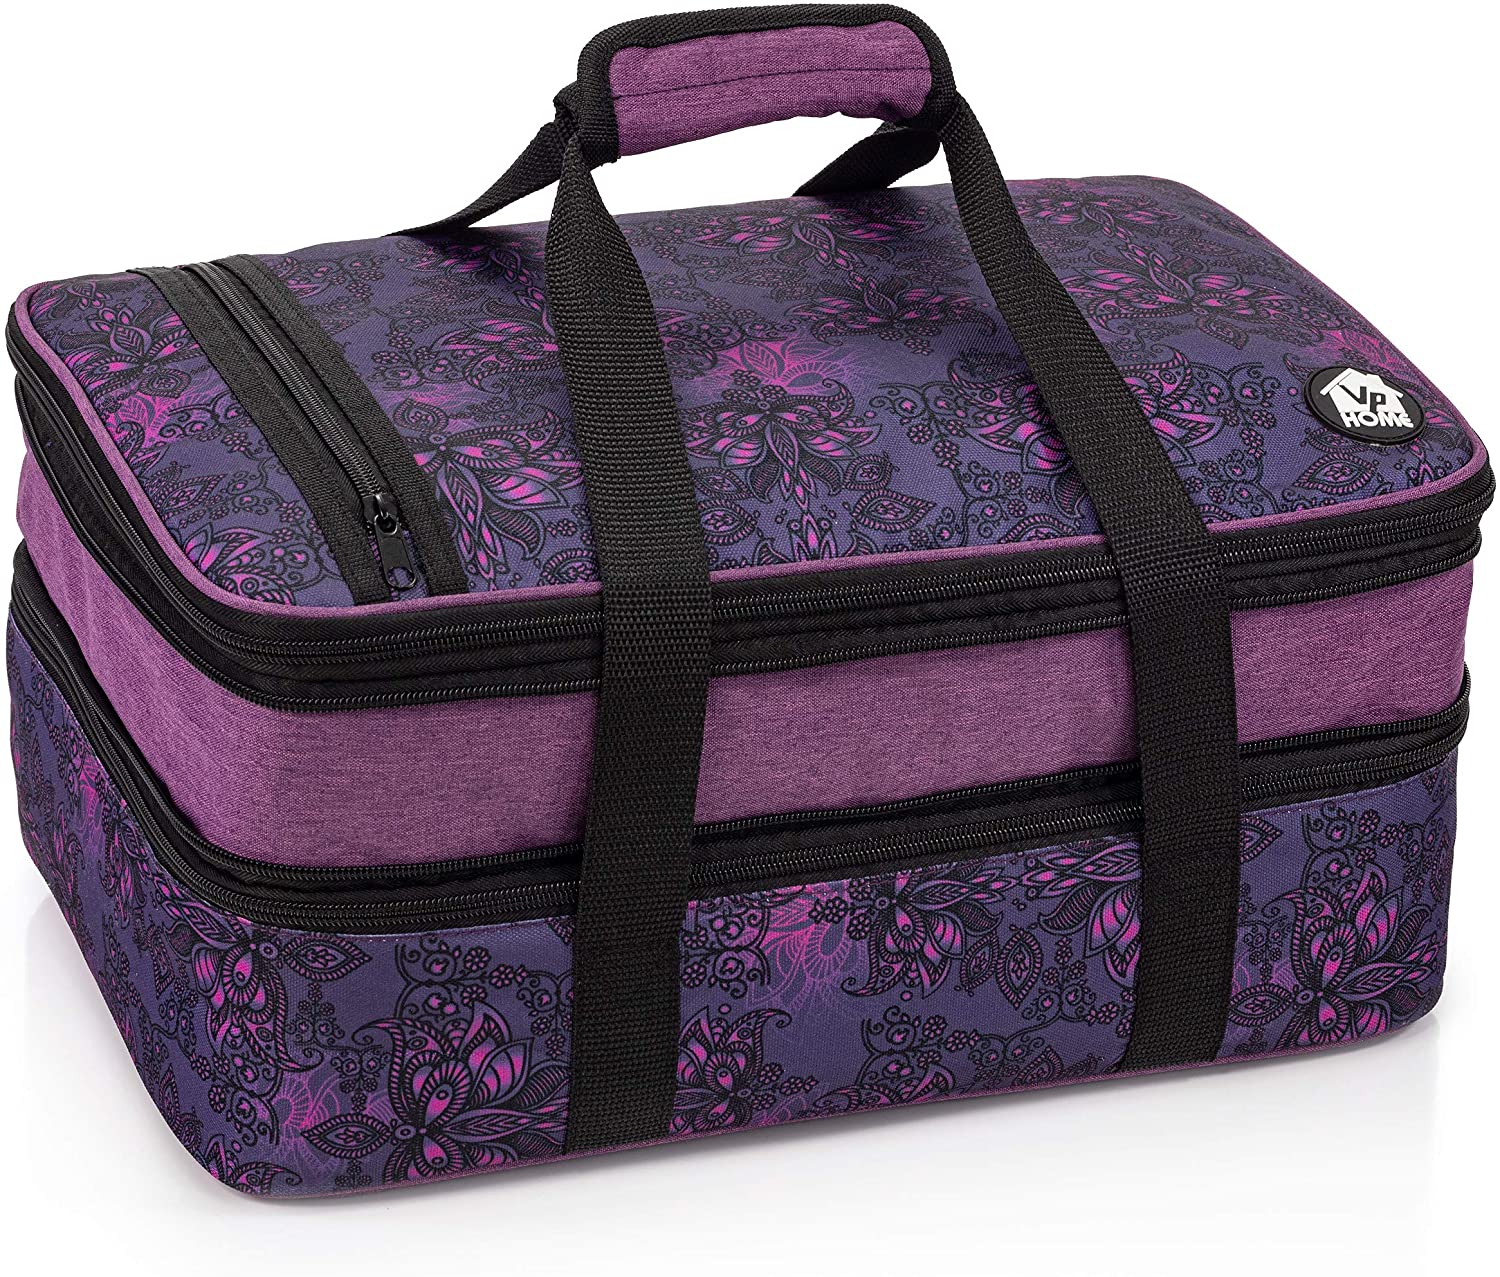 VP Home Double Casserole Insulated Travel Carry Bag (Henna Tattoo)